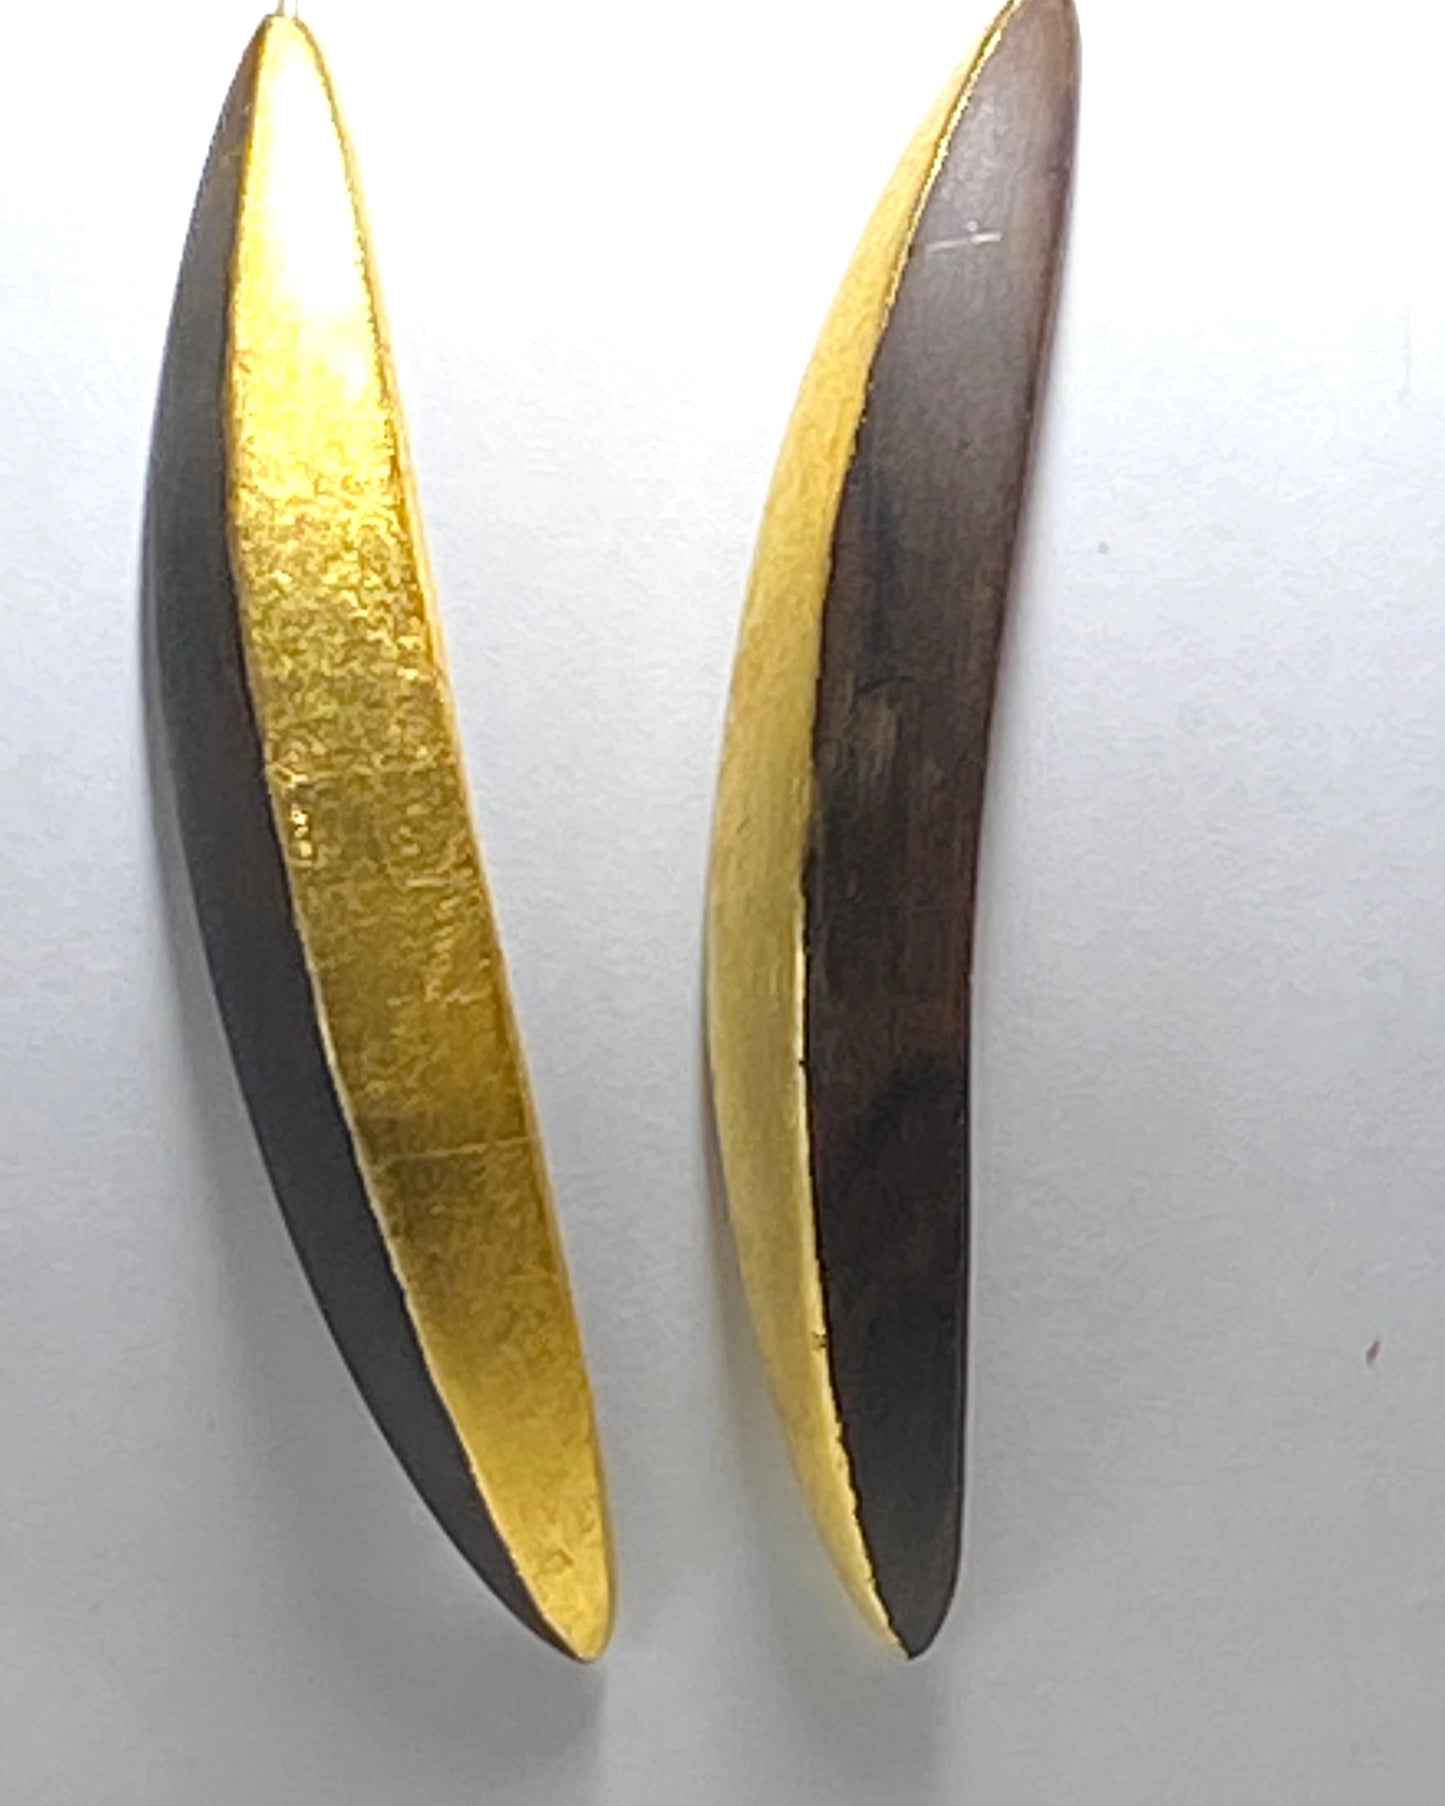 Statement Gold and Ebony Earrings